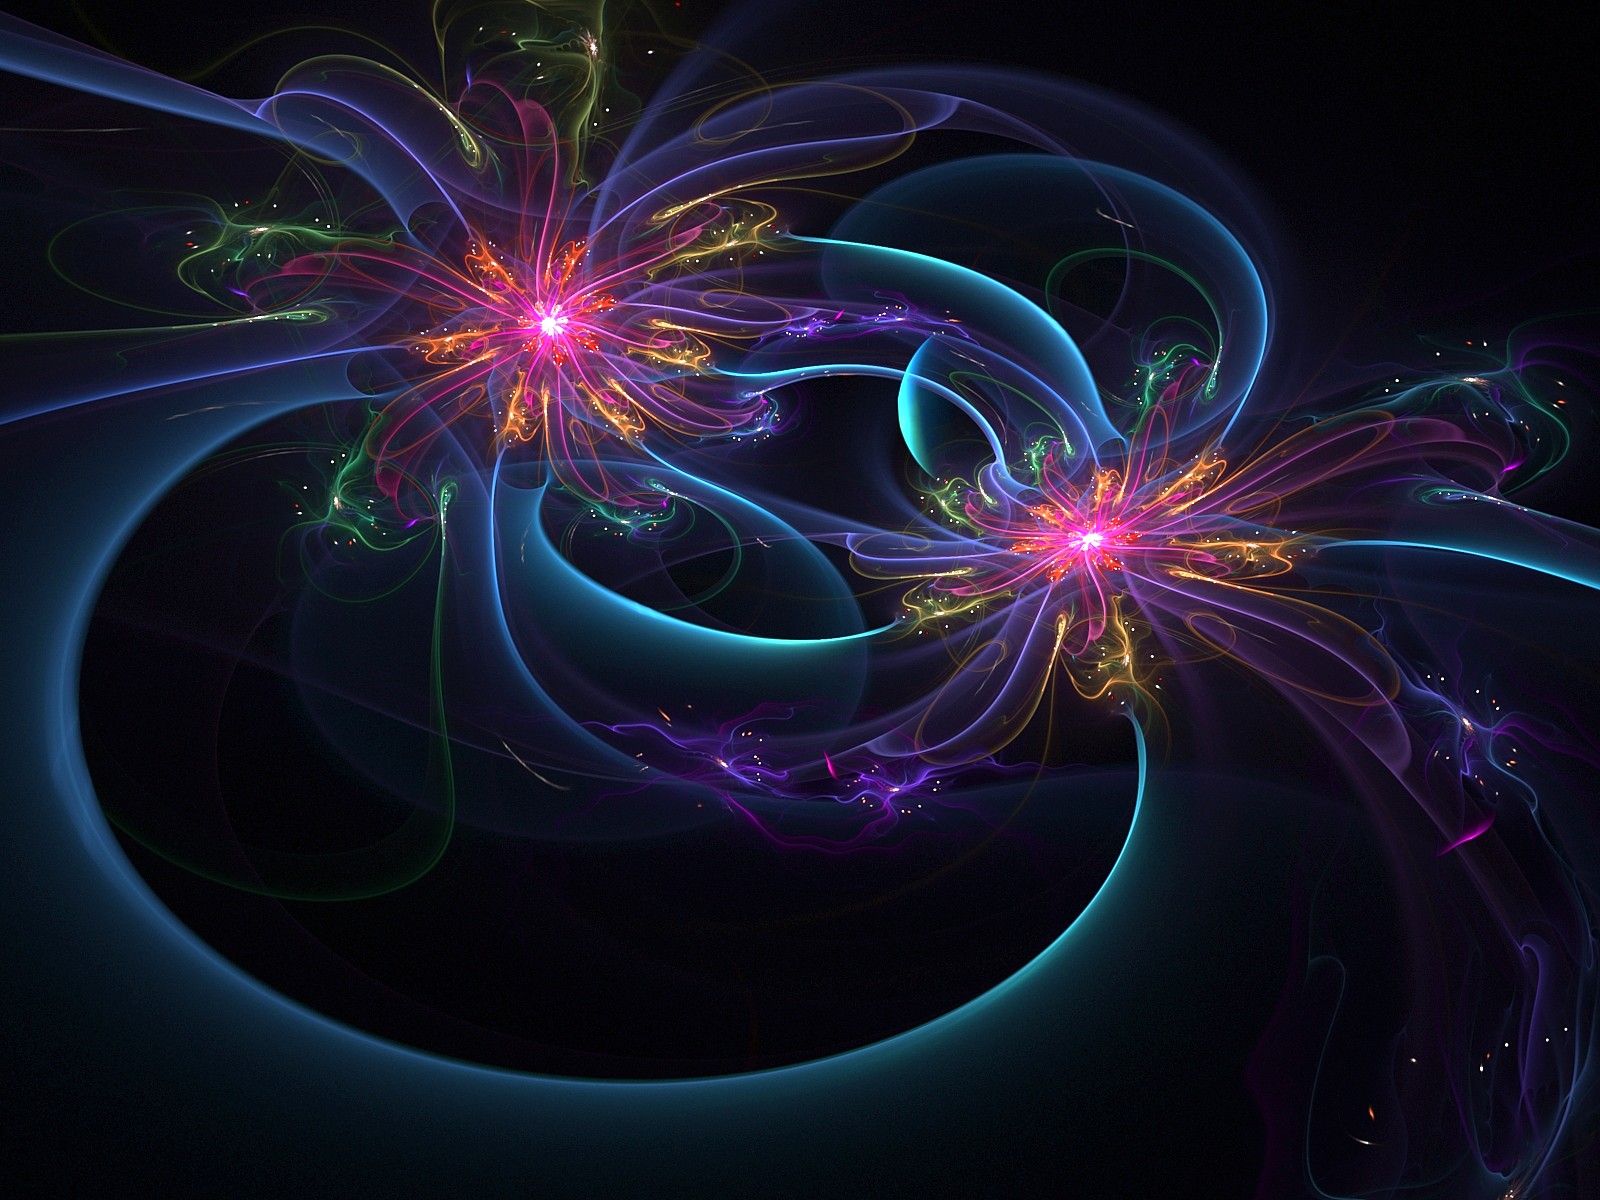 Abstract Fractal favourites by DanishWolf on DeviantArt